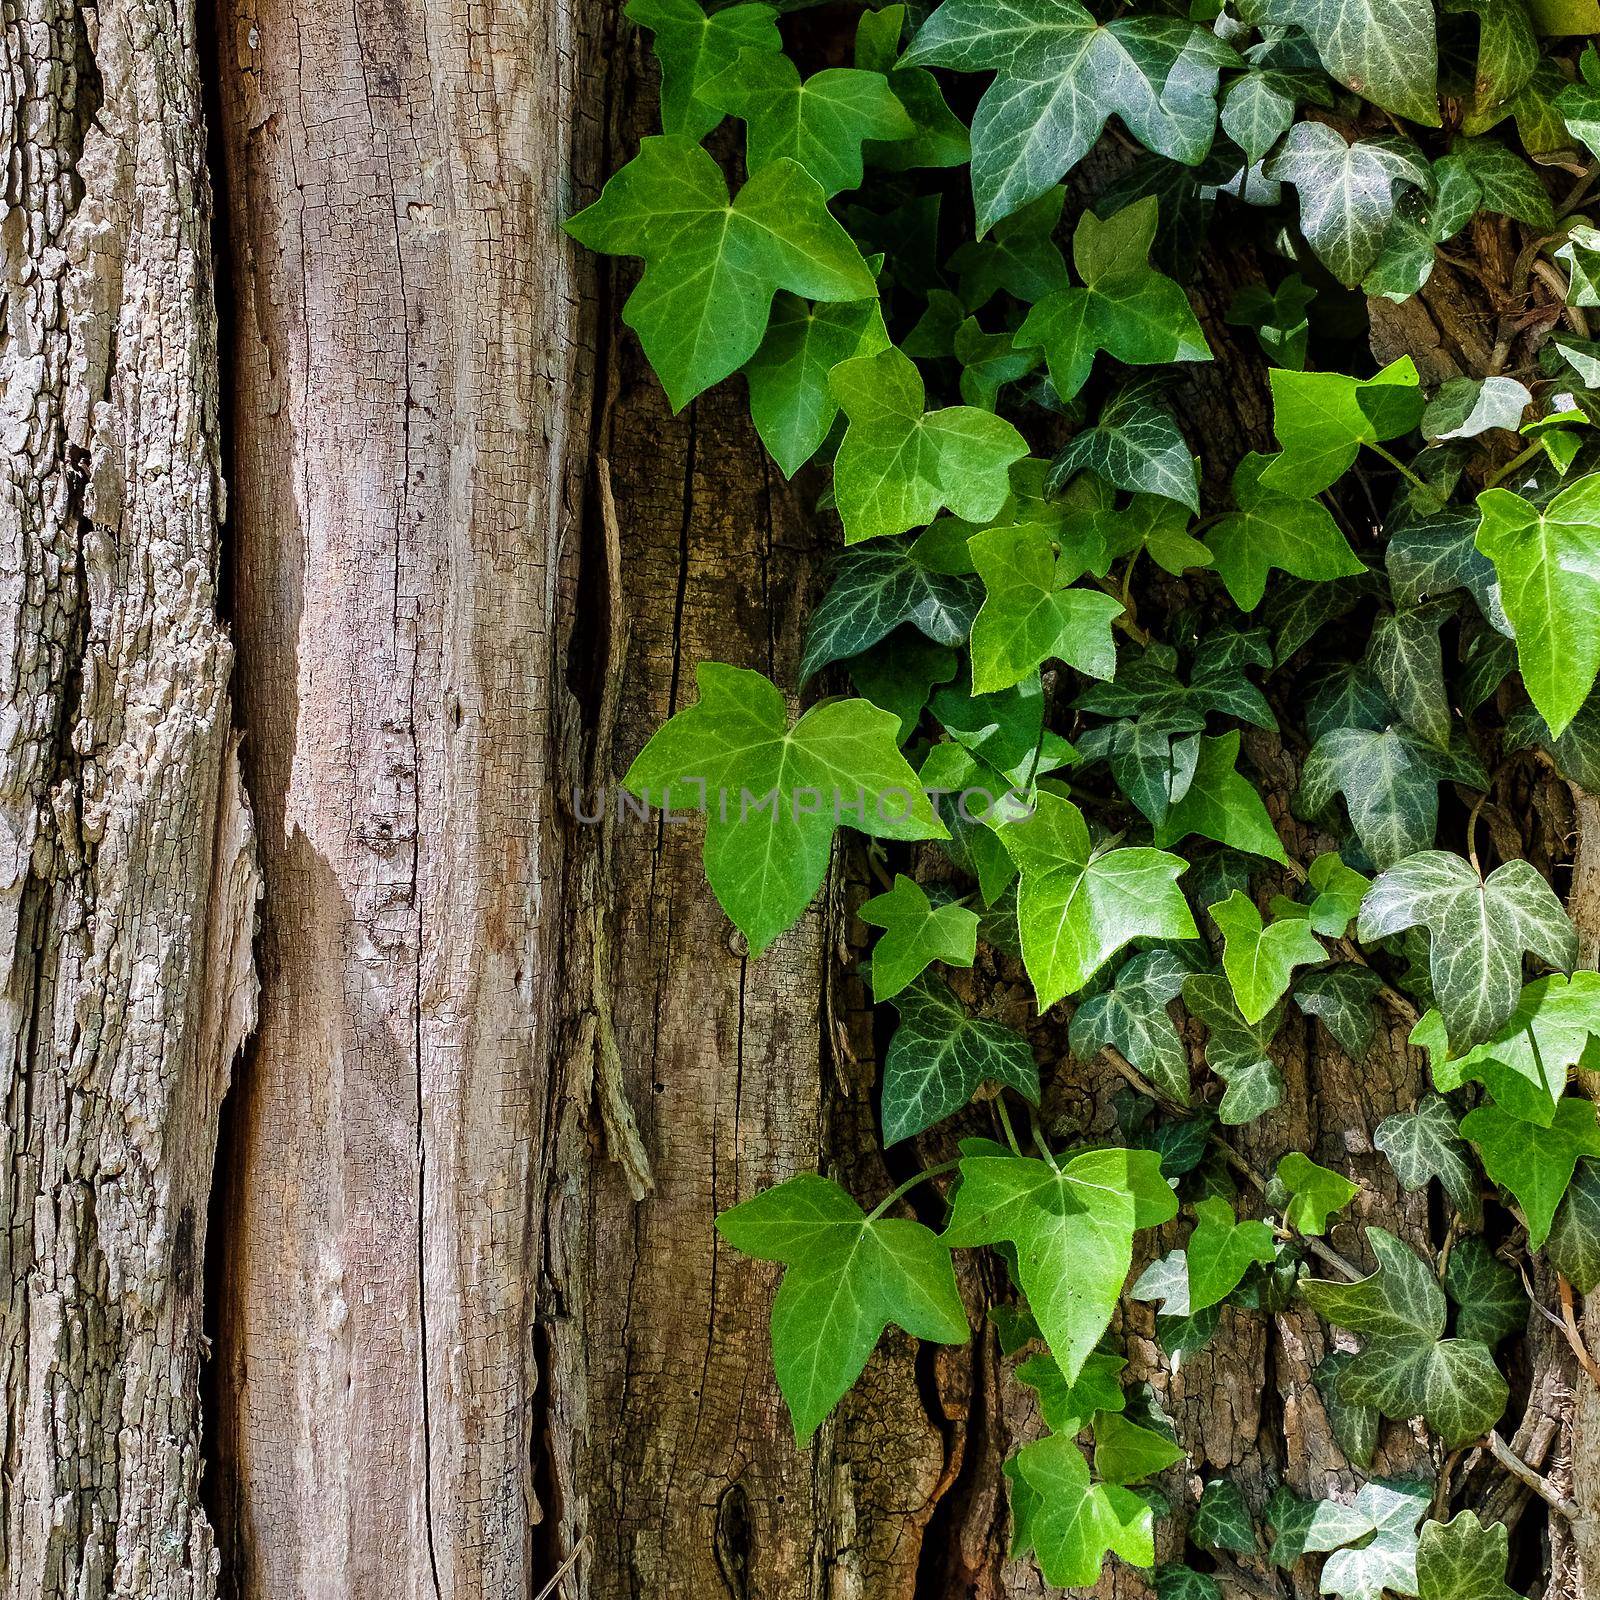 A trunk of a tree with ivy. Natural light